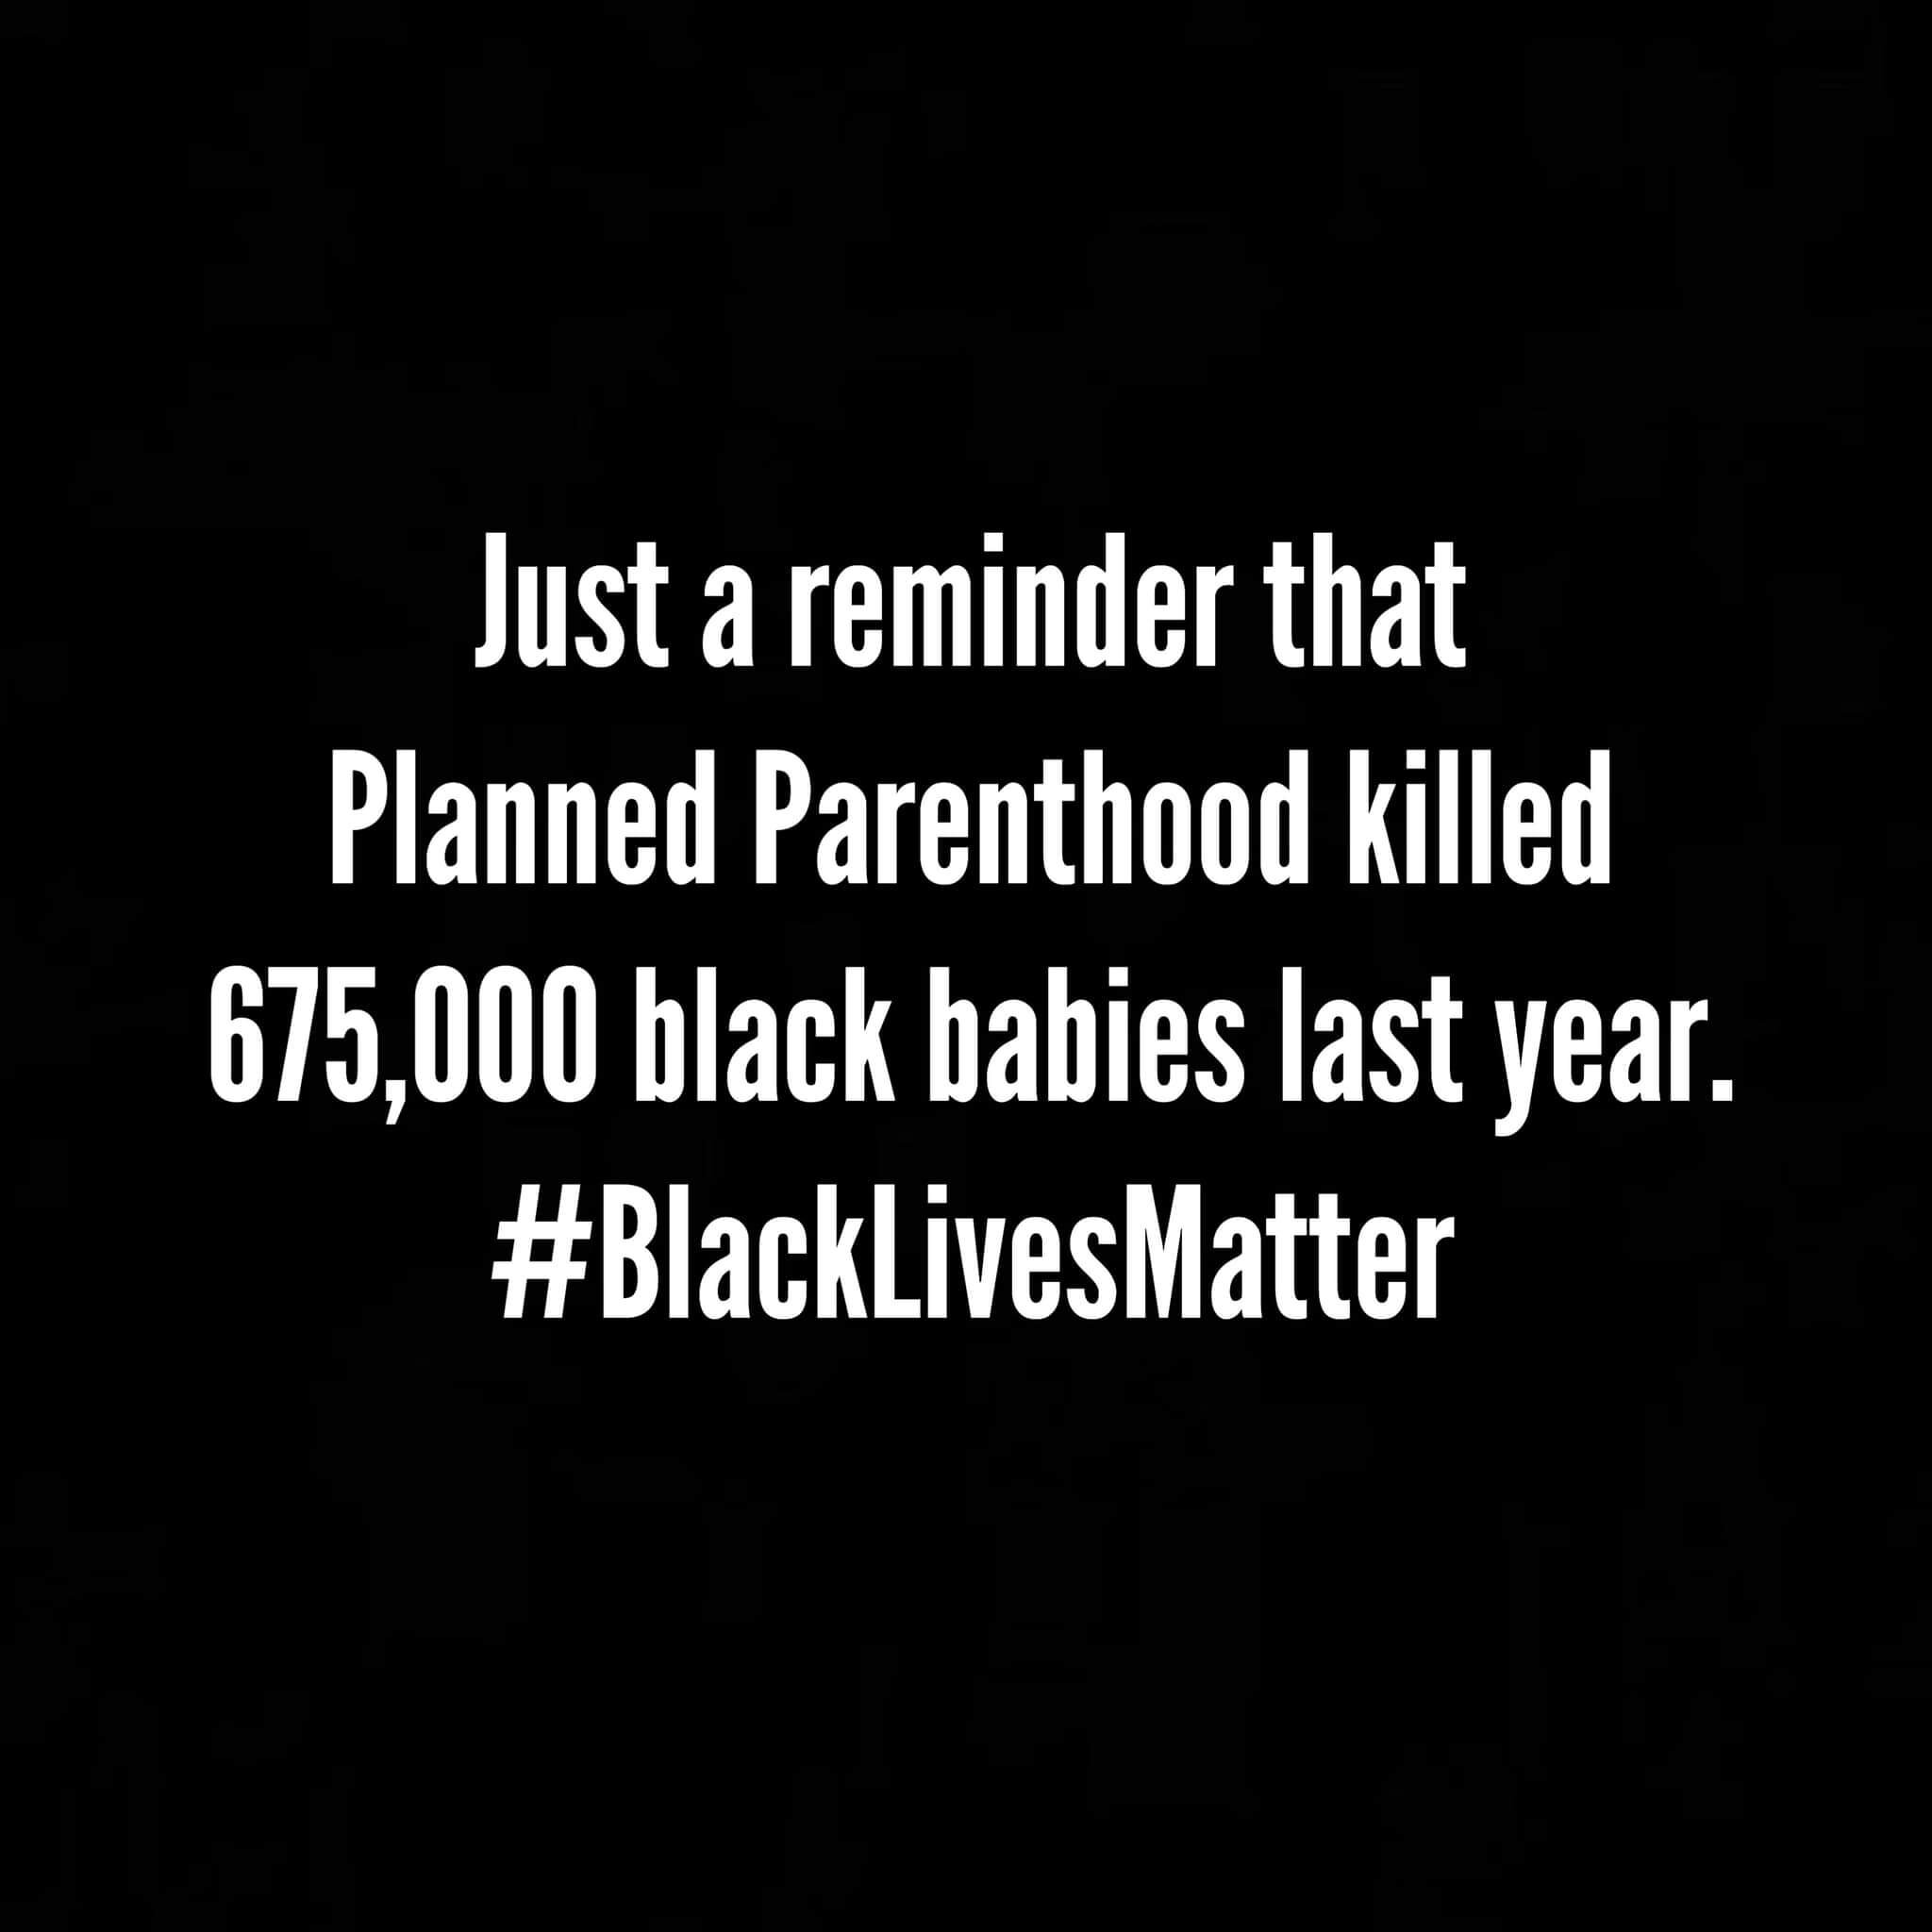 What's wrong with these Black Lives Matter memes? — Thoughts In 